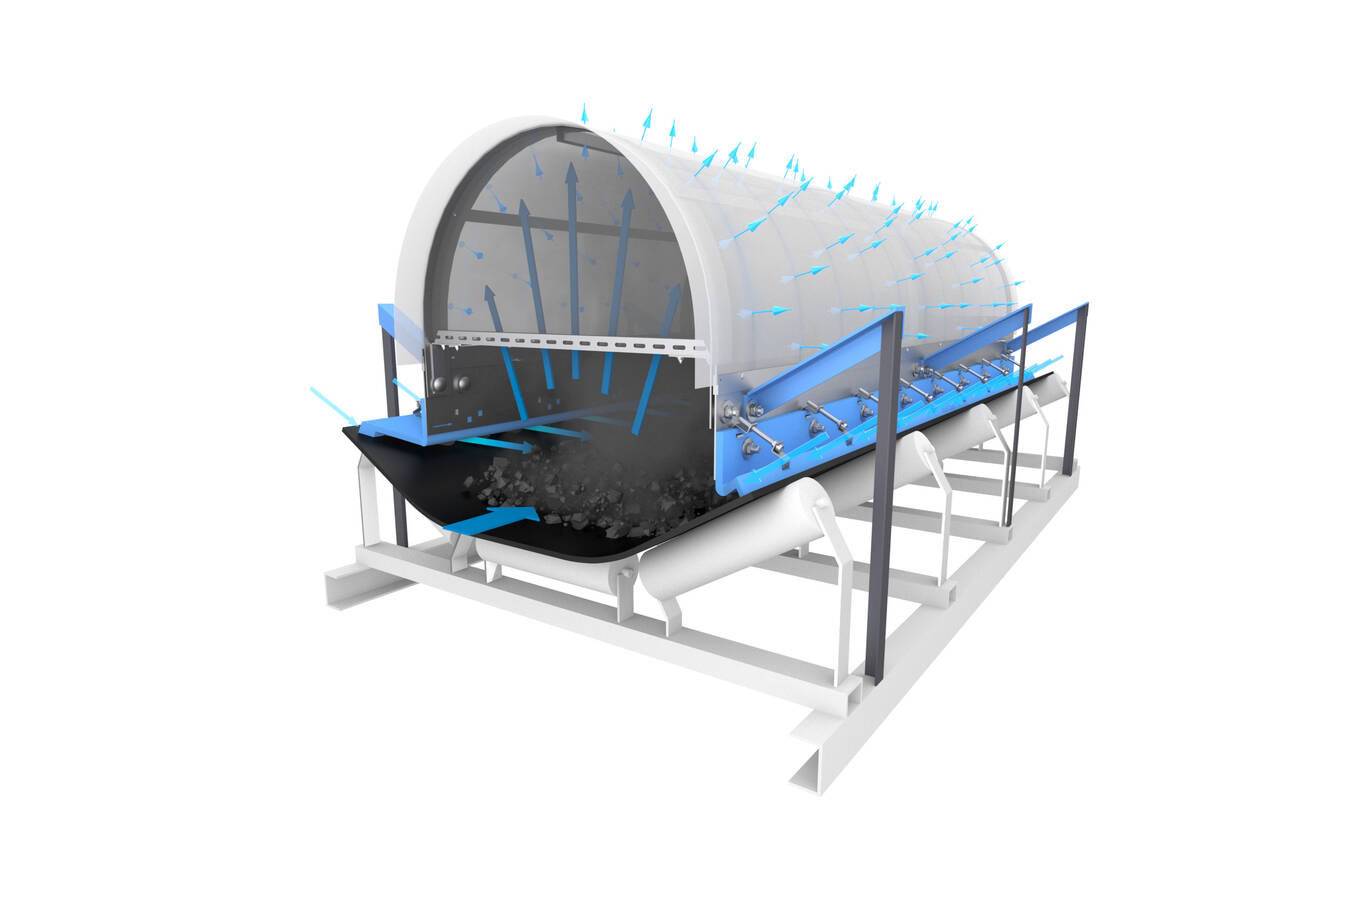 DustScrape controls the dust at your transfer points Simple but very effective dust control at your conveyor transfer points. With very little investment highly effective against dust formation.